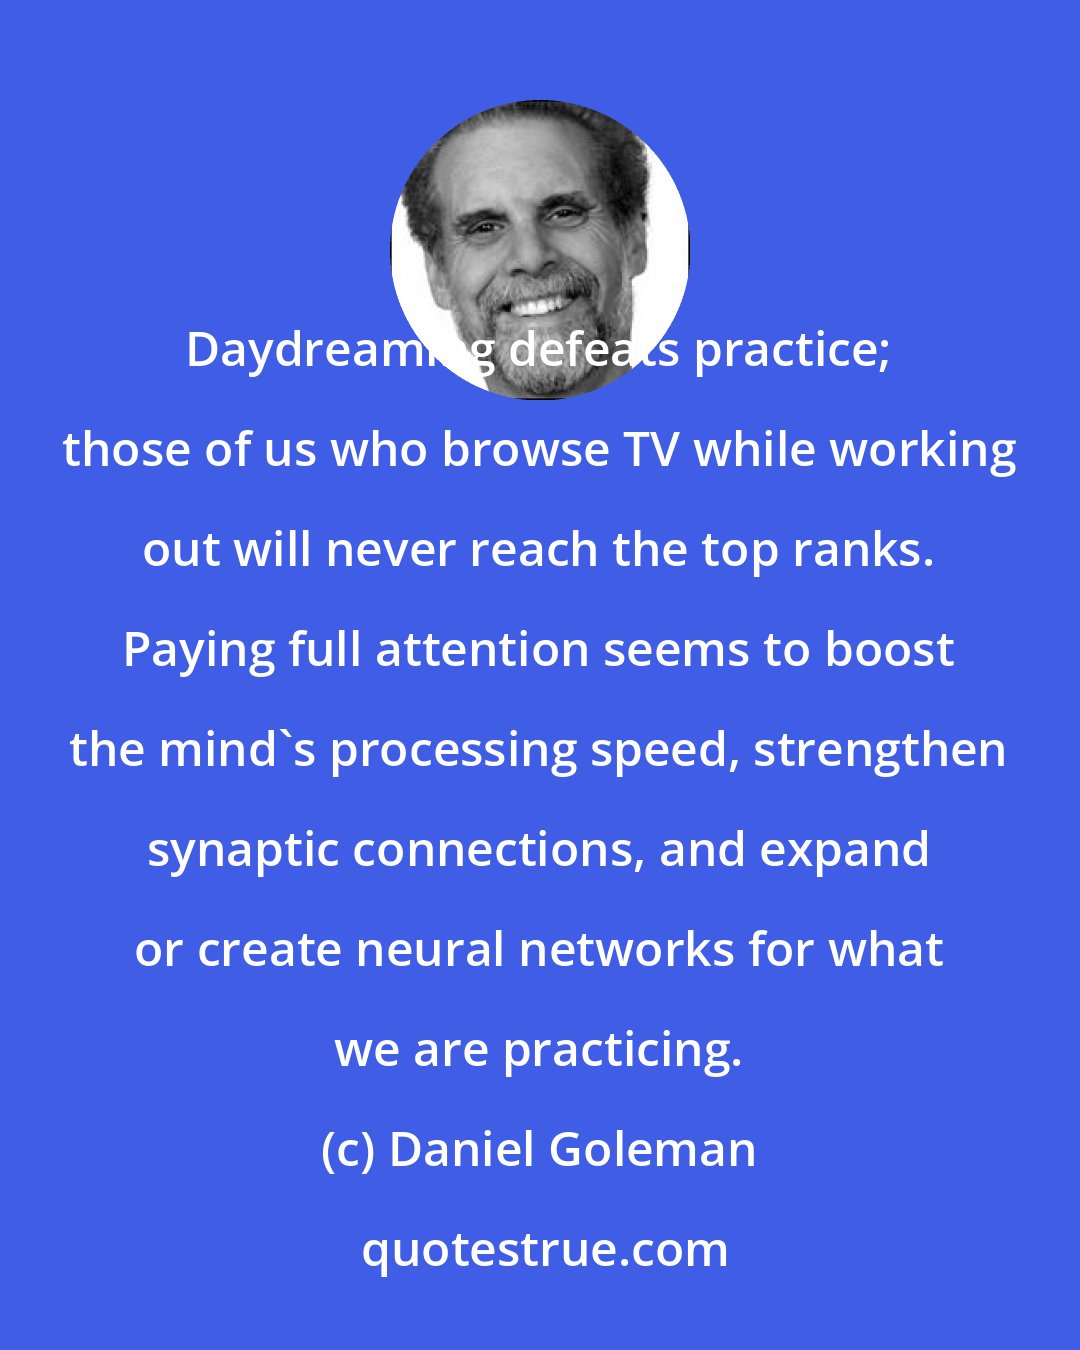 Daniel Goleman: Daydreaming defeats practice; those of us who browse TV while working out will never reach the top ranks. Paying full attention seems to boost the mind's processing speed, strengthen synaptic connections, and expand or create neural networks for what we are practicing.